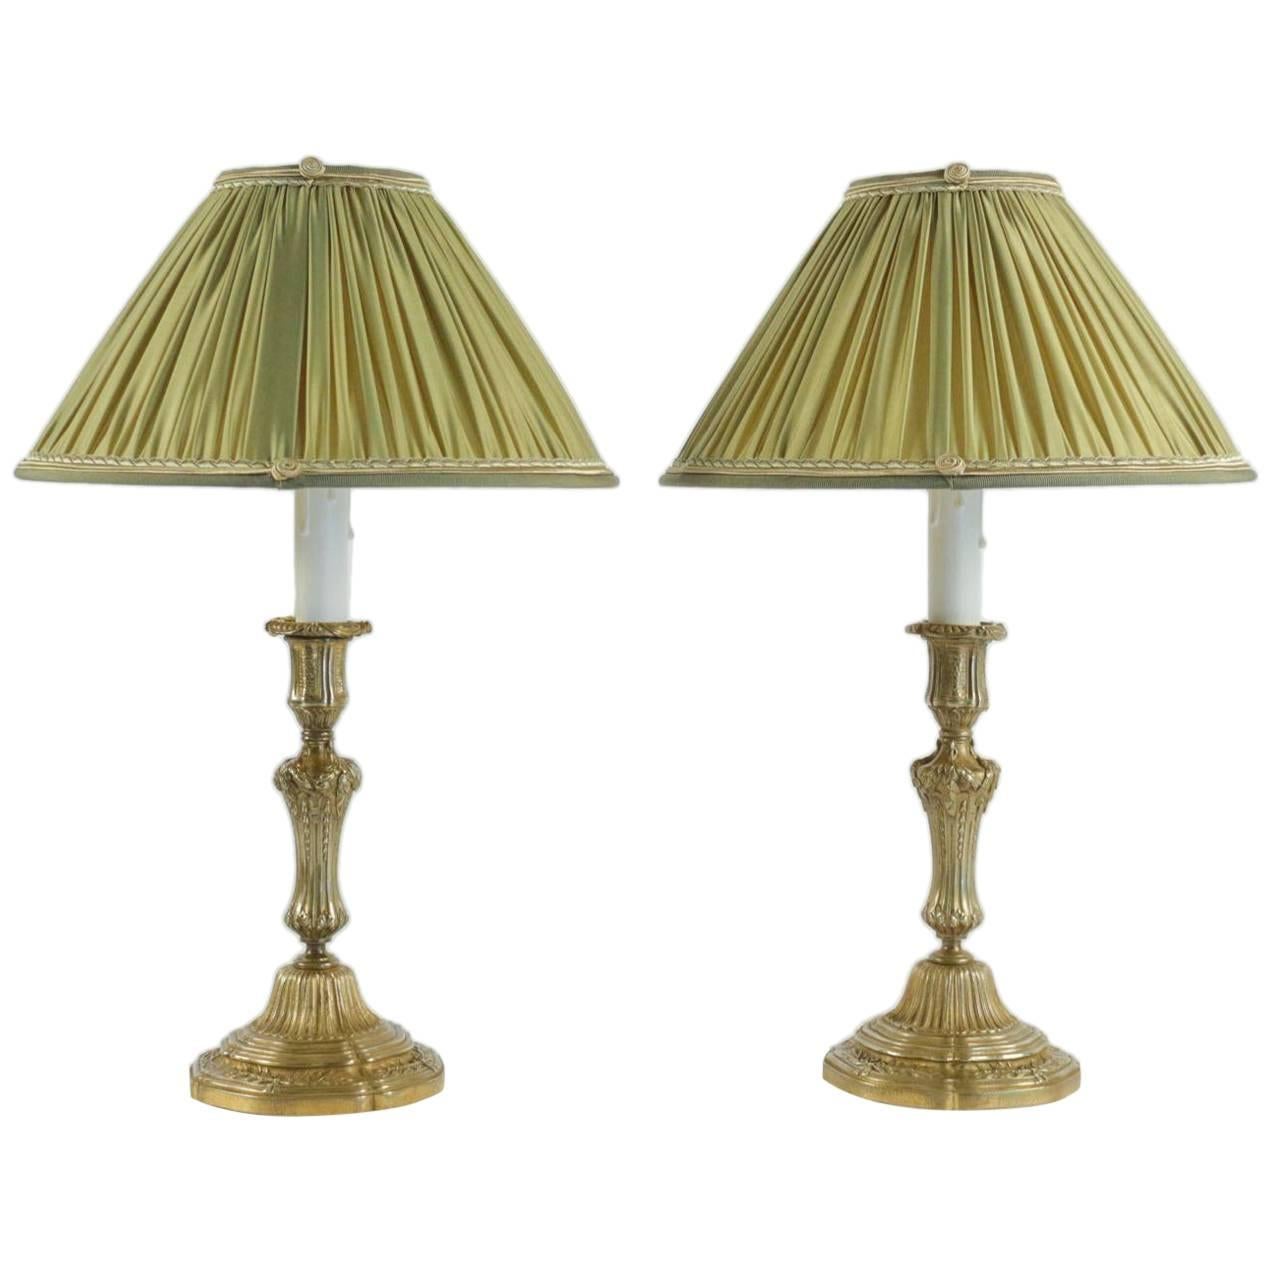 Early 19th Century Pair of French Louis XVI Style Ormulu Candlestick Lamps